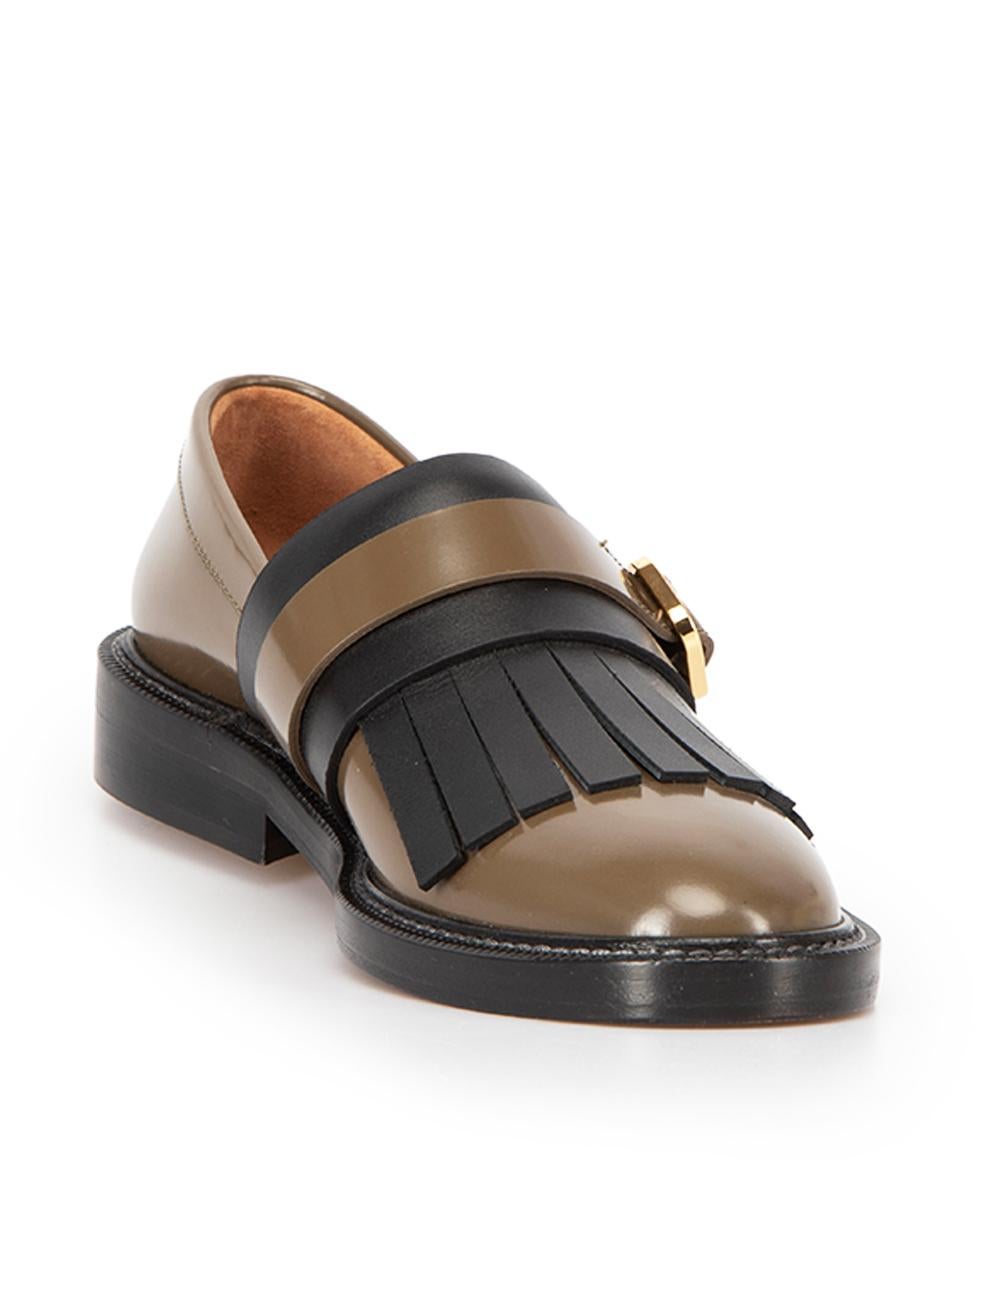 CONDITION is Never Worn. No visible wear to shoes is evident on this used Marni designer resale item. These shoes come with original dust bag.



Details


Khaki

Leather

Black leather wide fringe

Buckle vamp strap

Almond-toe

Low heel

Leather